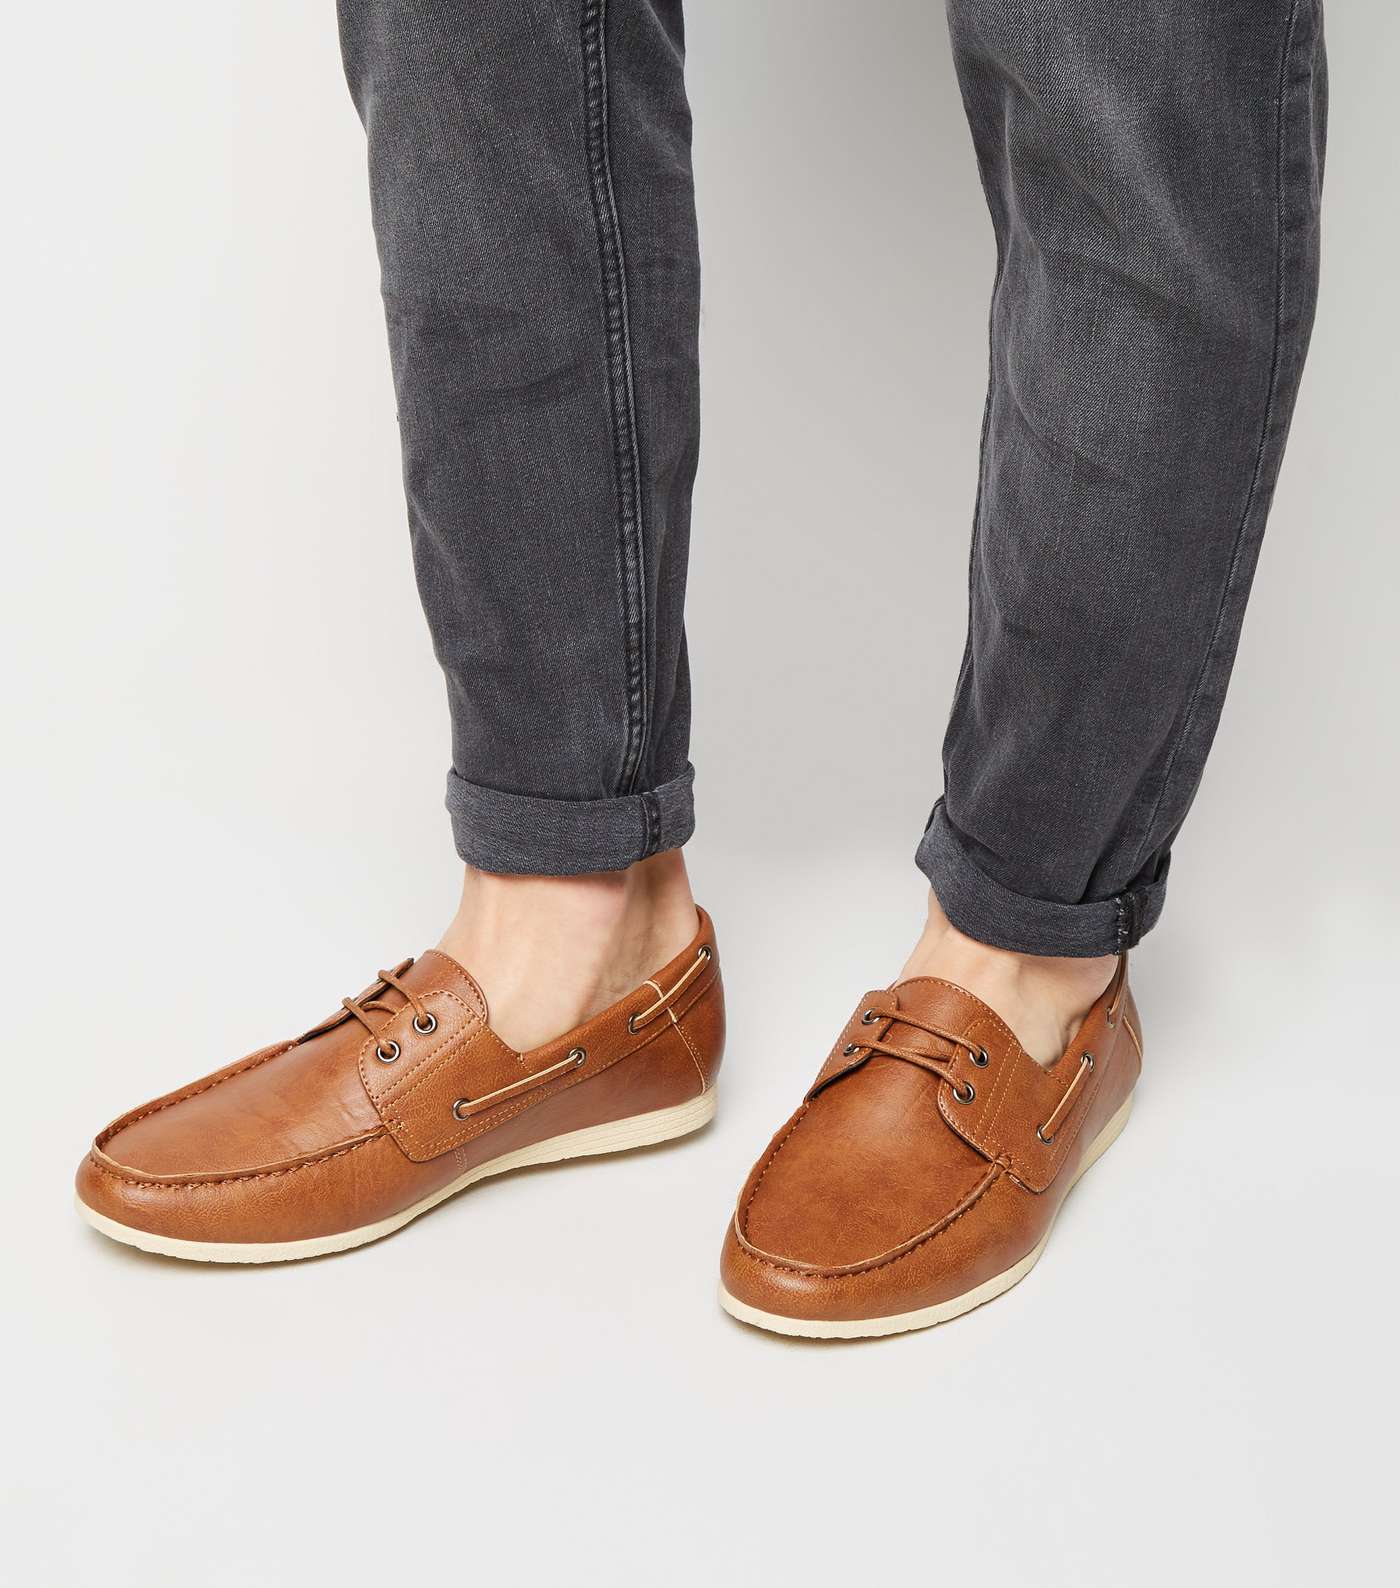 Tan Leather-Look Boat Shoes